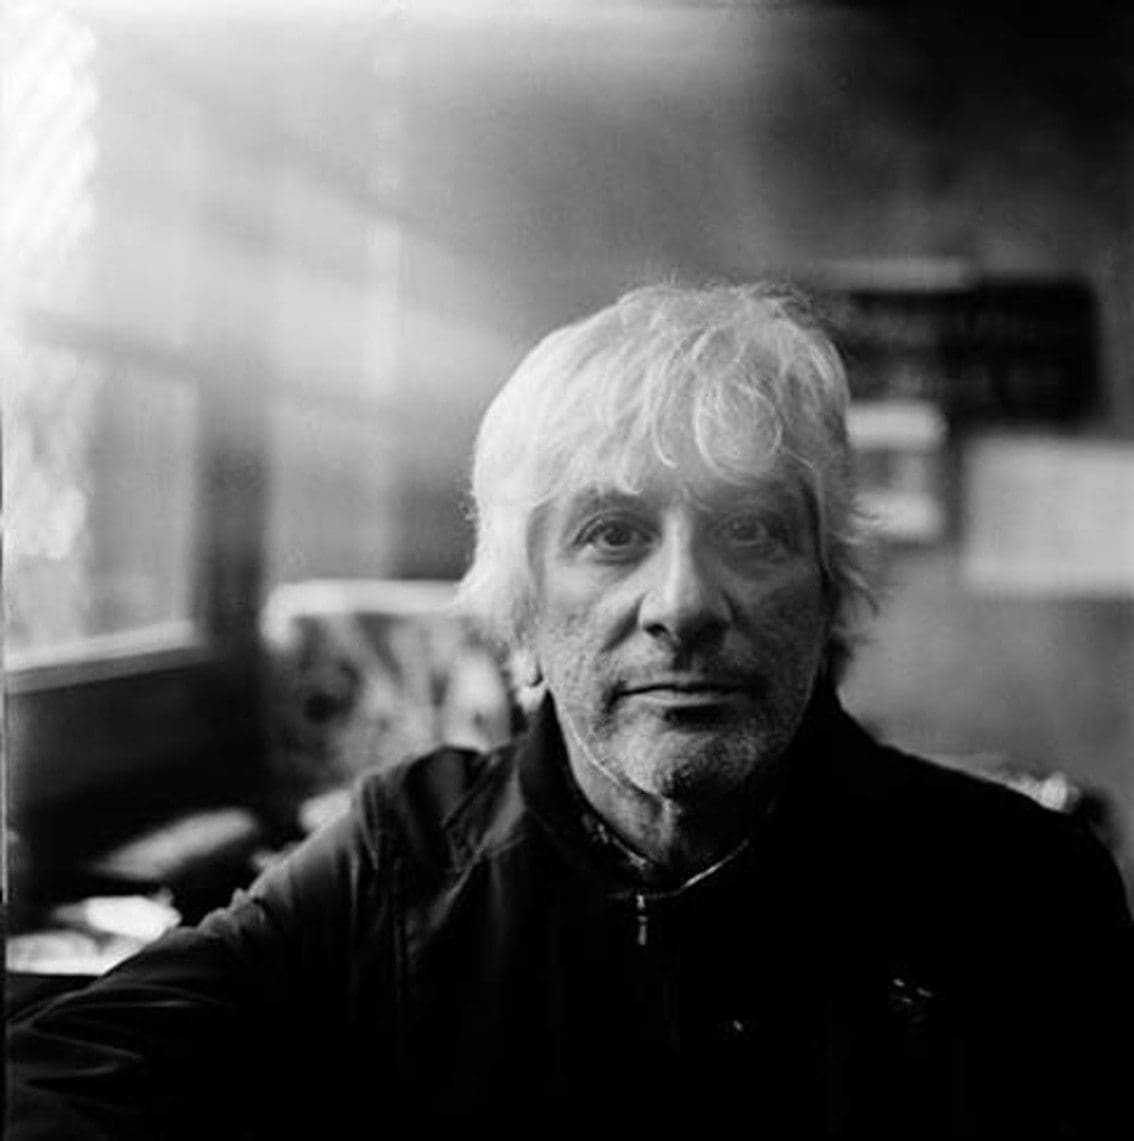 Mute announces the signing of Sonic Youth founding member Lee Ranaldo